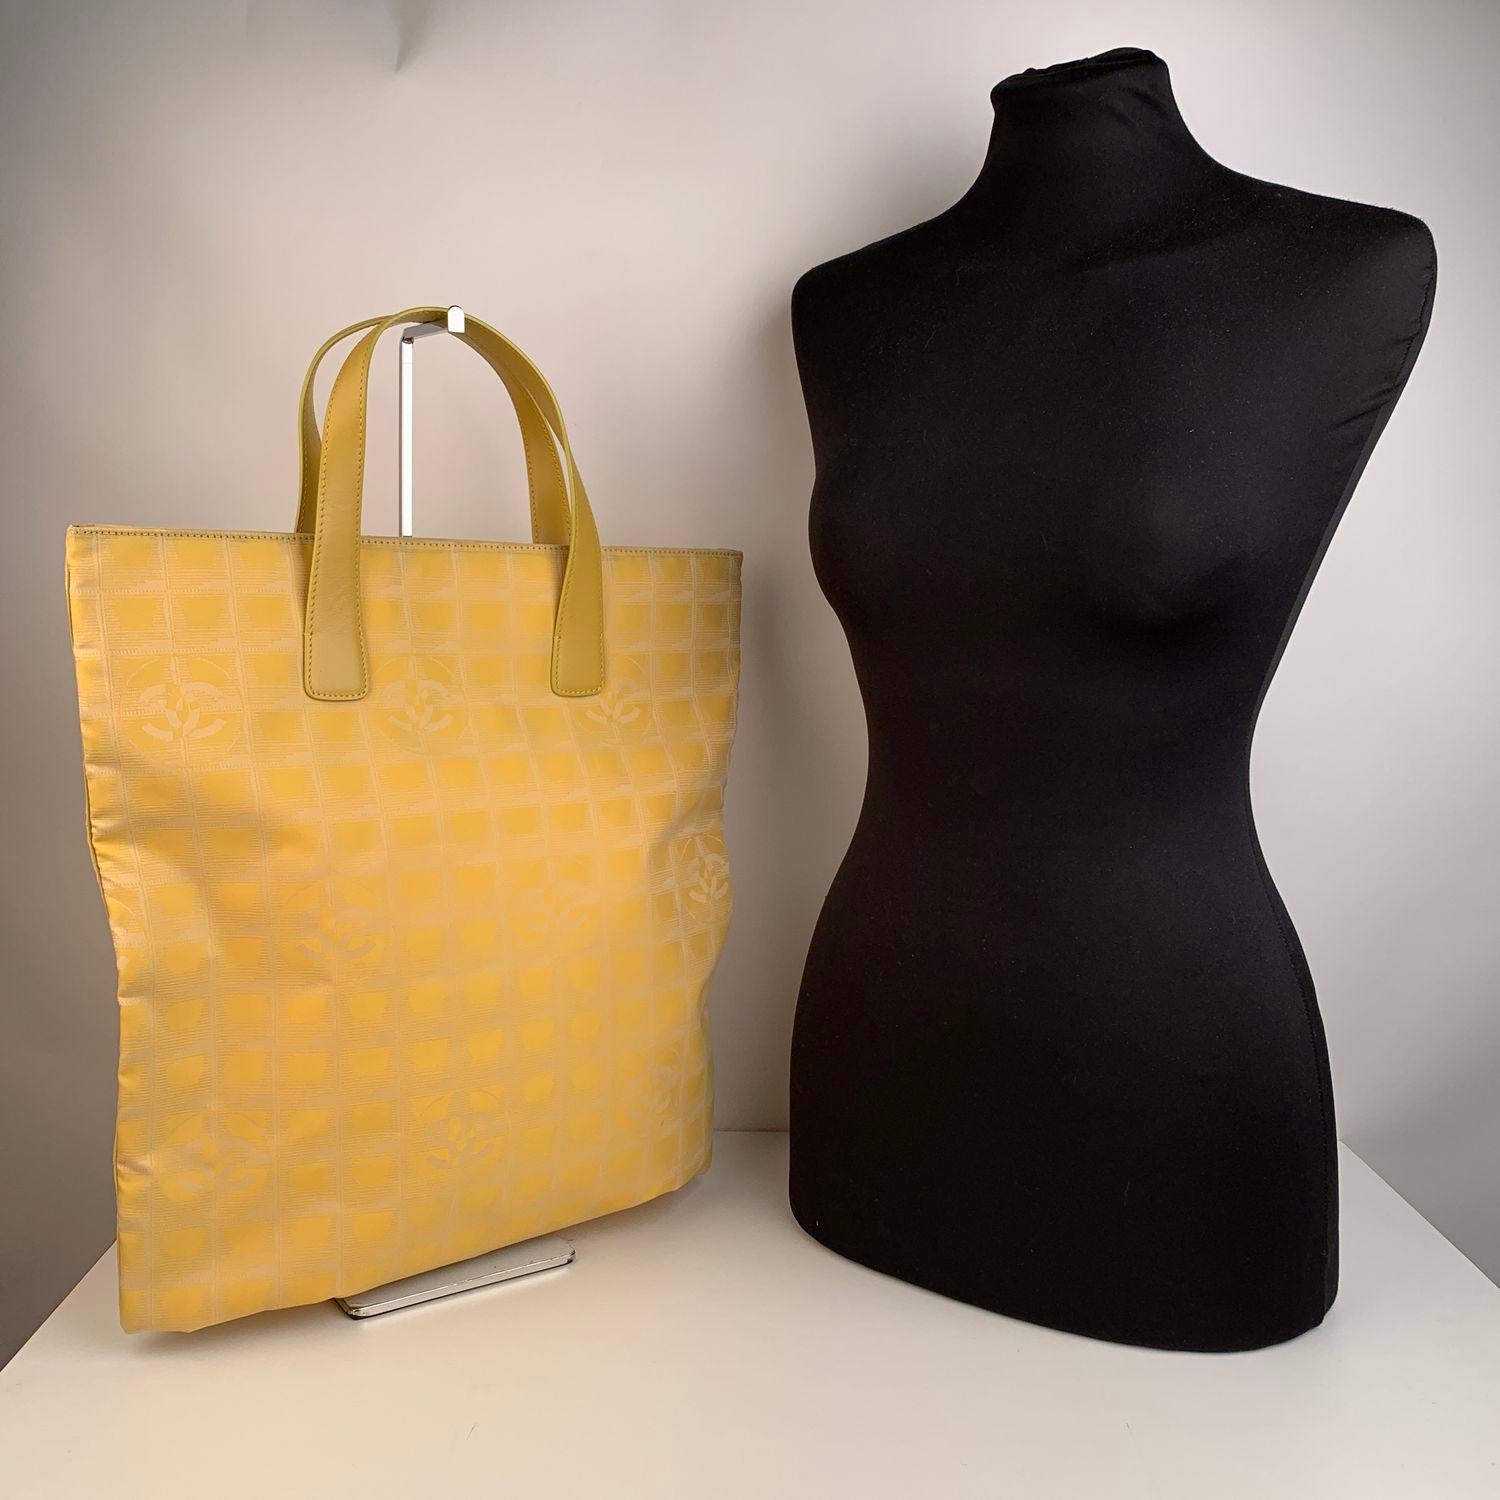 Chanel yellow jacquard nylon tote bag from the 'Travel line' collection. Yellow leather top handles.Double magnetic button closure on top. Yellow nylon lining with 2 side zip pockets inside. 'Chanel - Made in Italy' tag and authenticity hologram tag